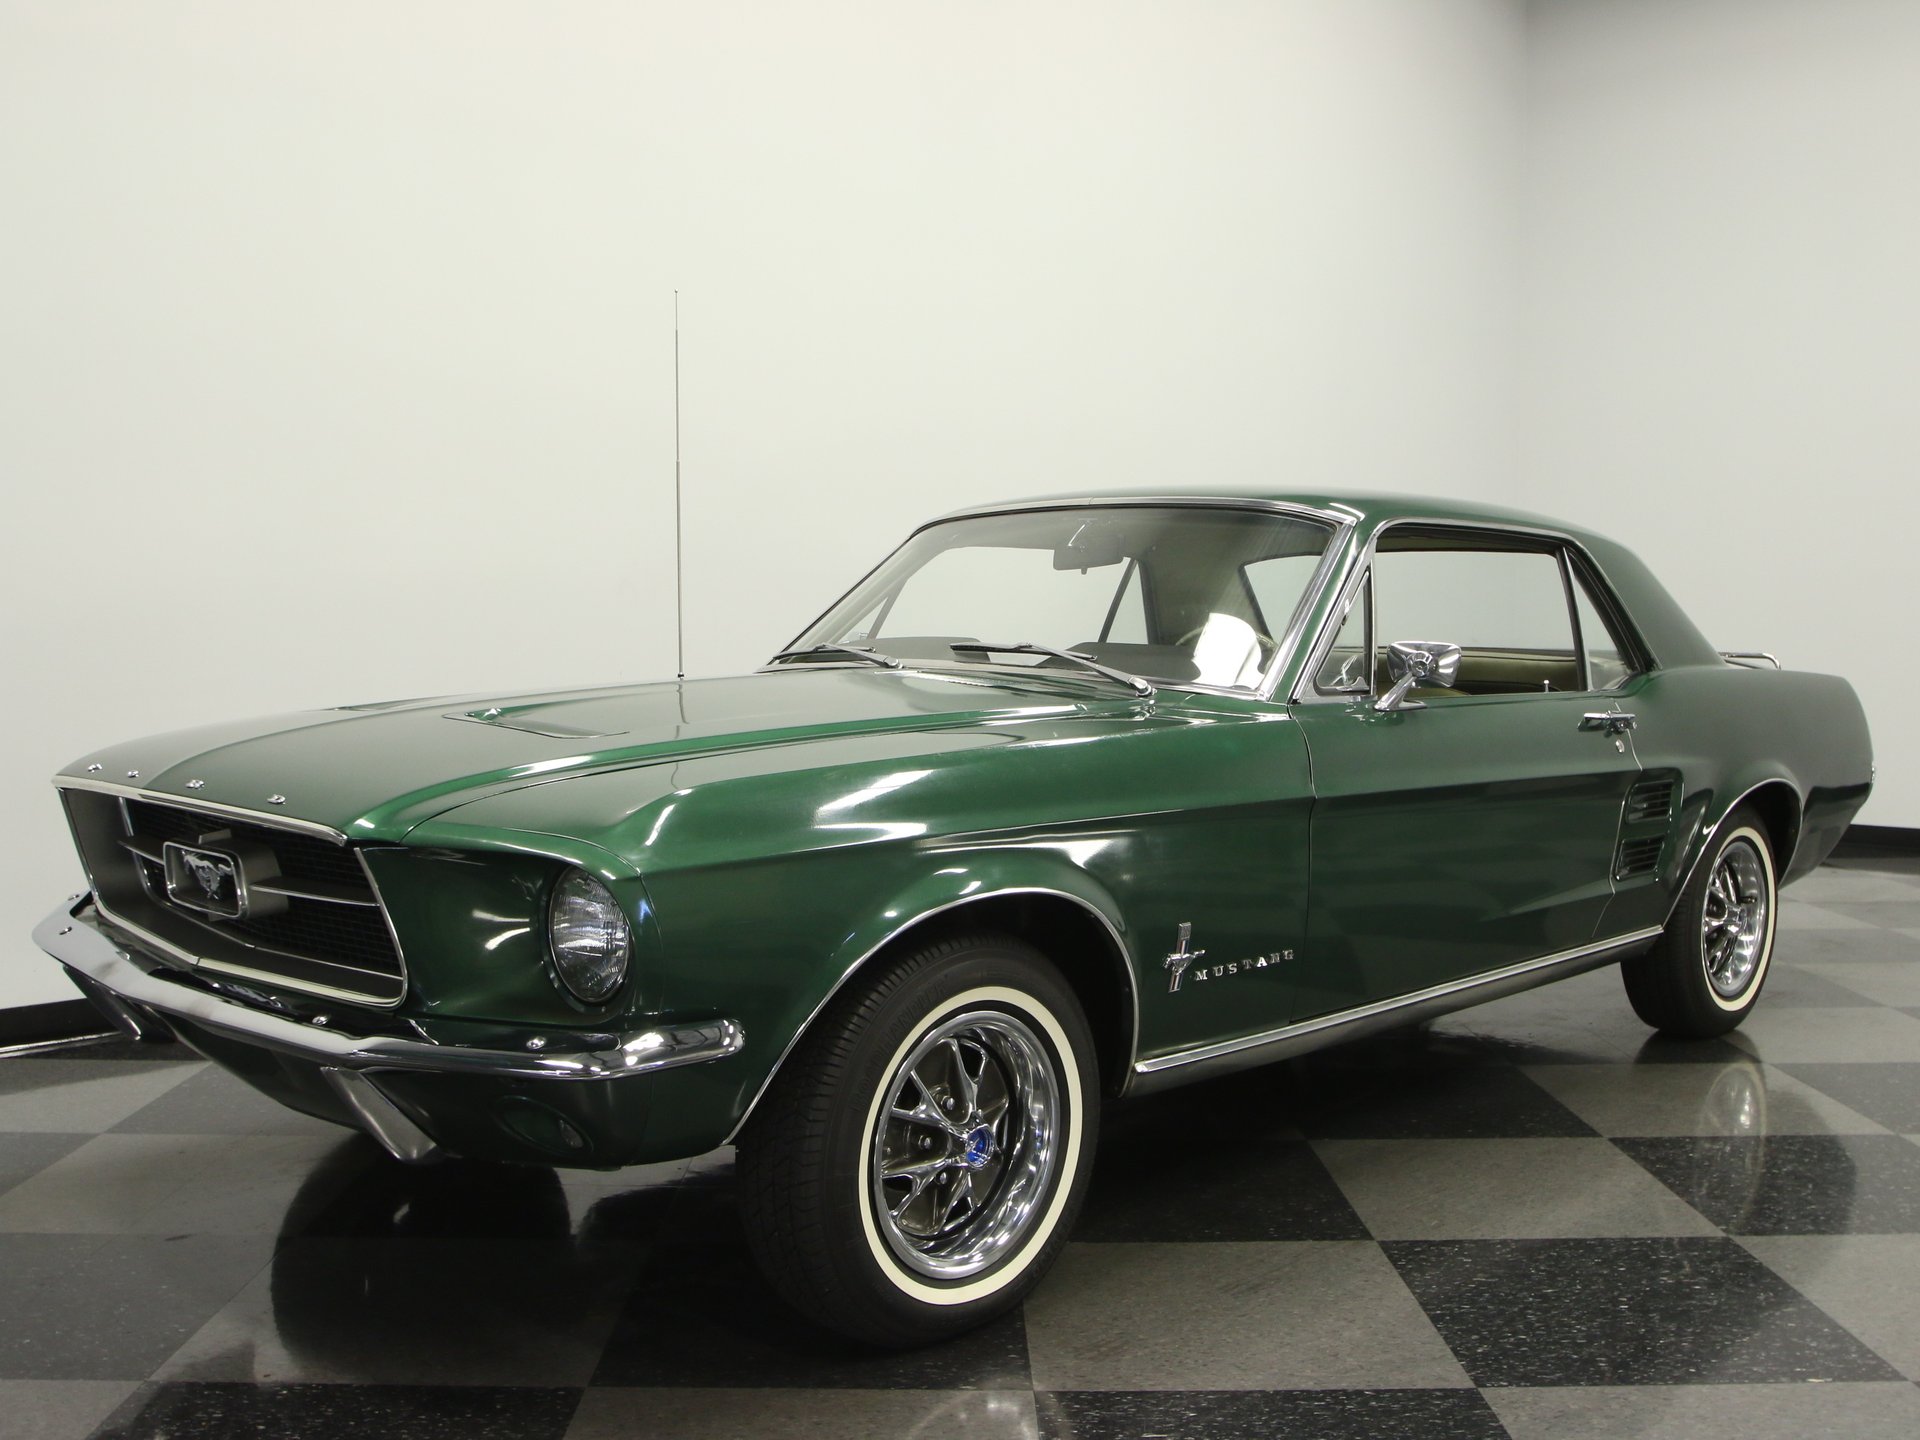 1967 Ford Mustang | Classic Cars for Sale - Streetside Classics